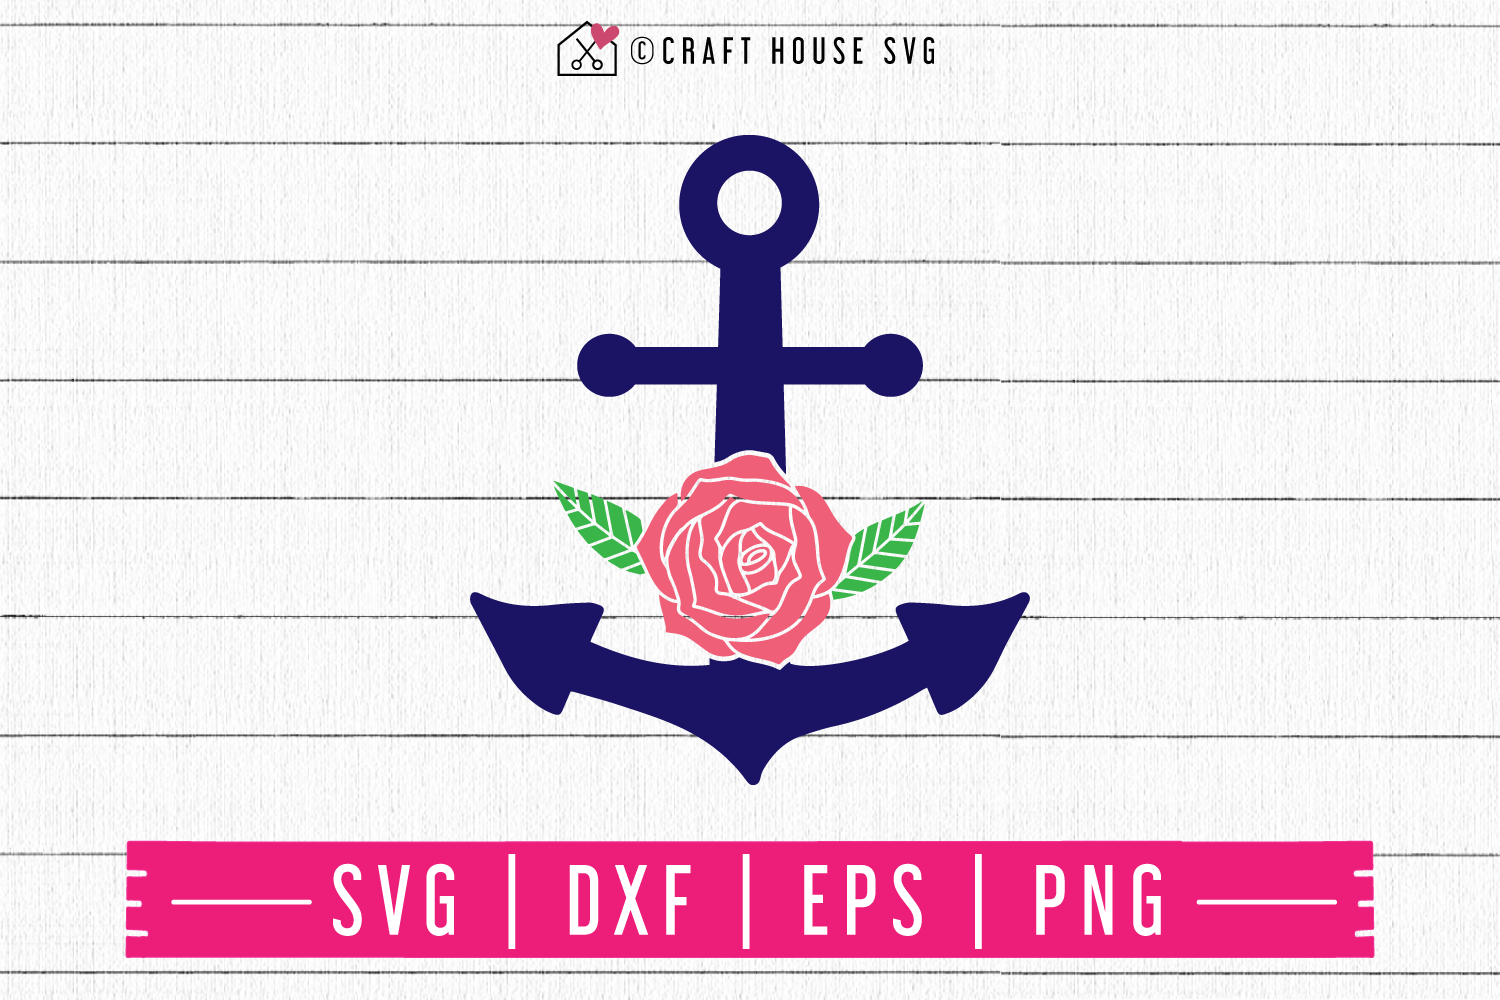 FREE Floral anchor SVG | FB112 Craft House SVG - SVG files for Cricut and Silhouette